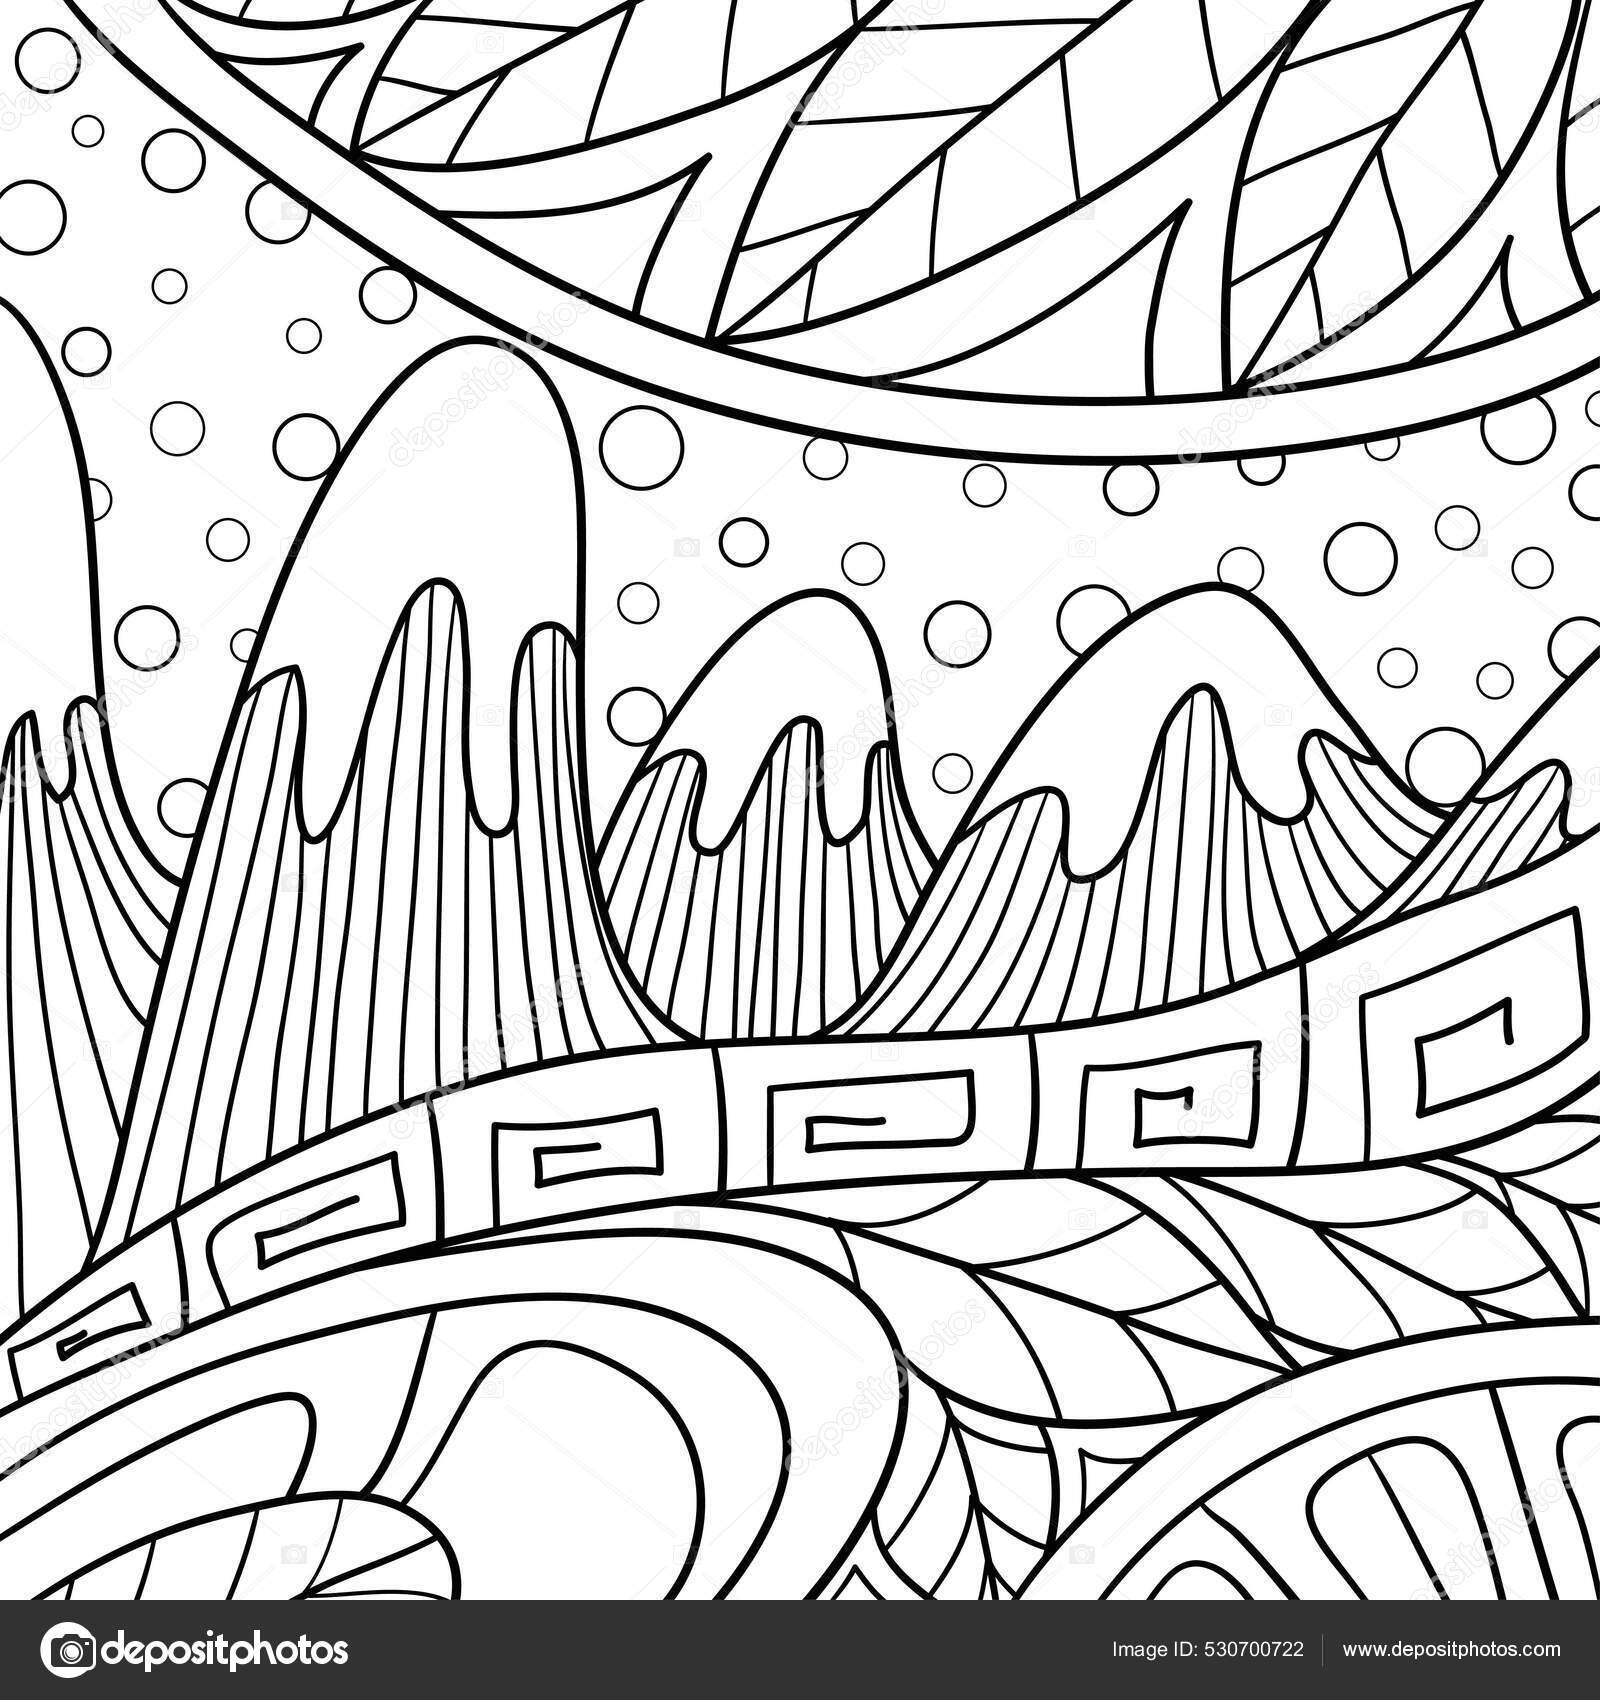 Abstracts: Colouring Book For Adults (Colouring Books For Adults